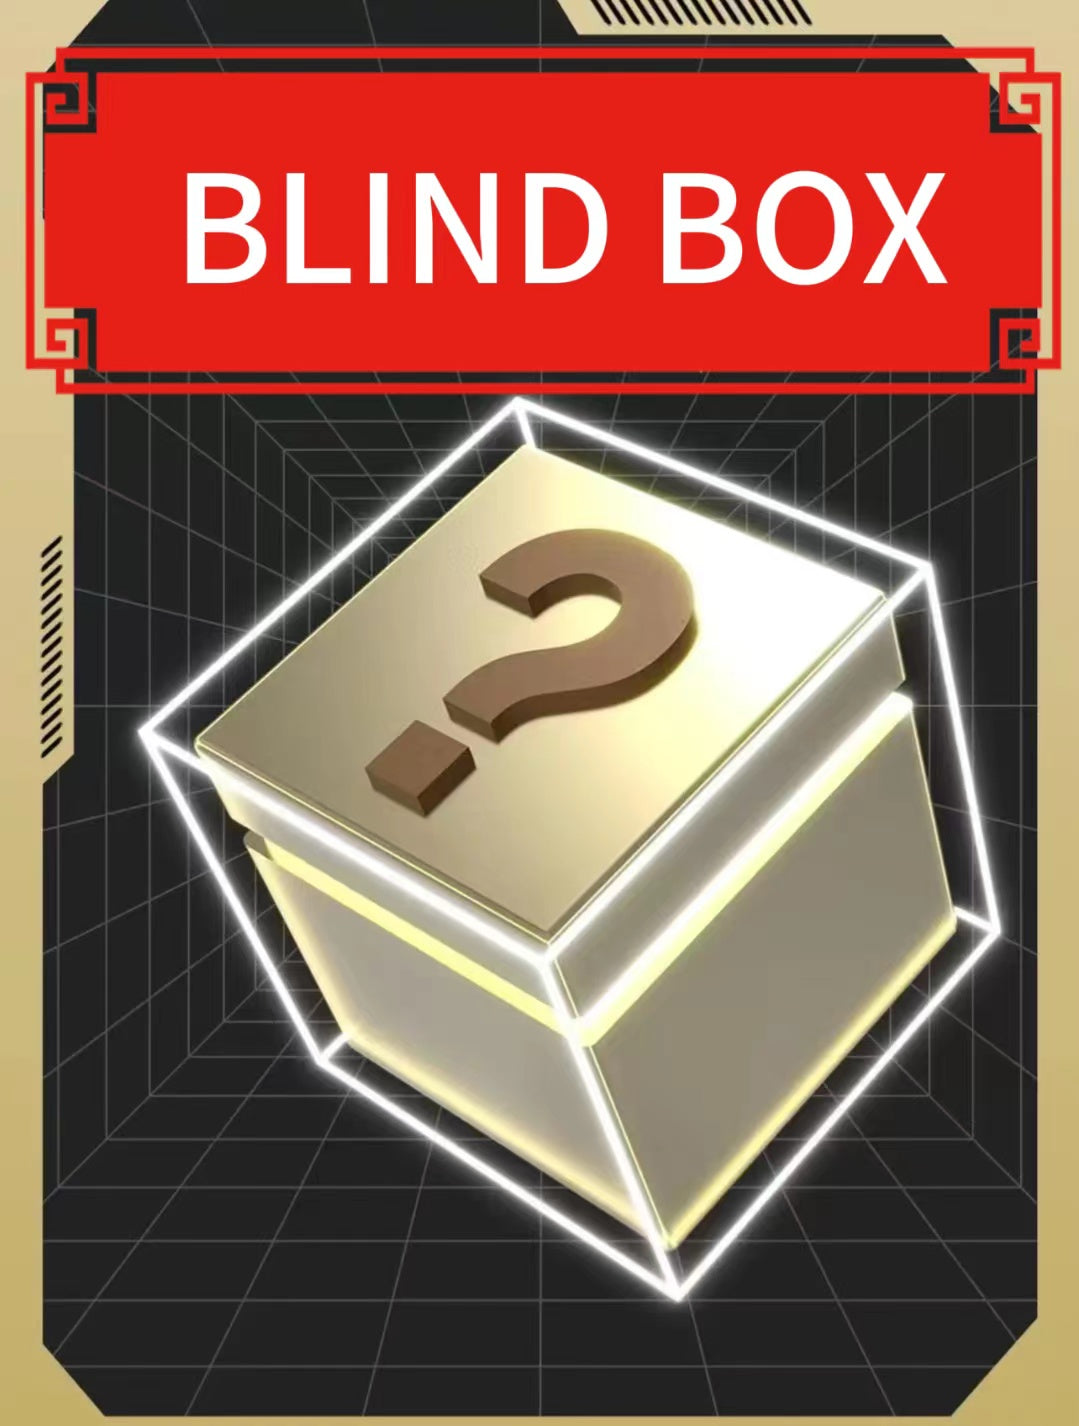 BLIND BOX AVAILABLE TODAY ONLY